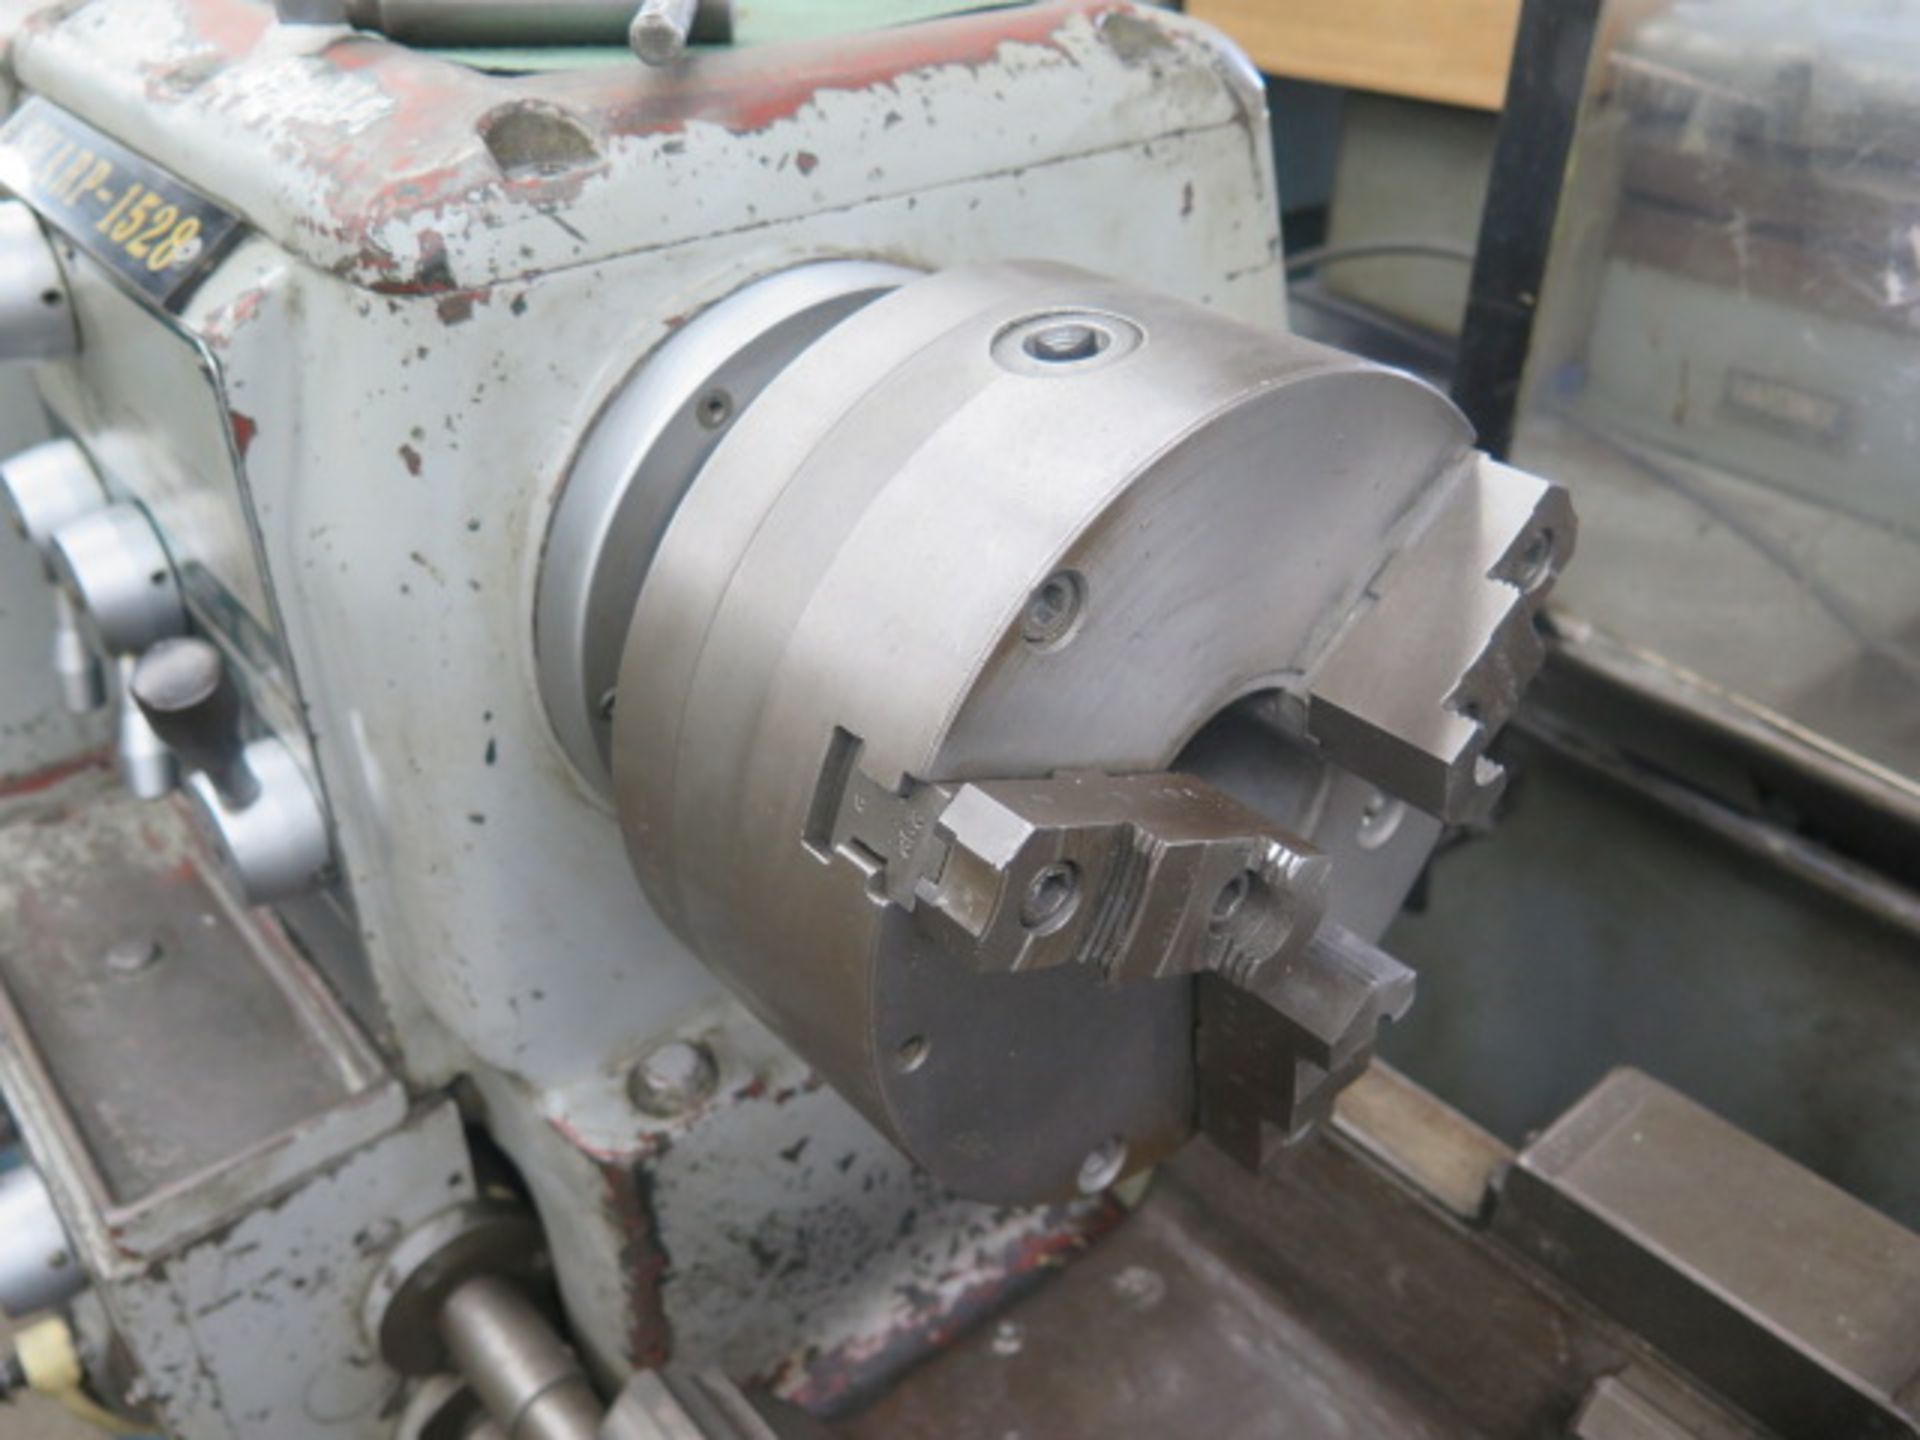 Sharp 1528 15” x 28” Geared Head Gap Bed Lathe s/n 922 w/ 83-1800 RPM, Inch/mm Threading, SOLD AS IS - Image 4 of 12